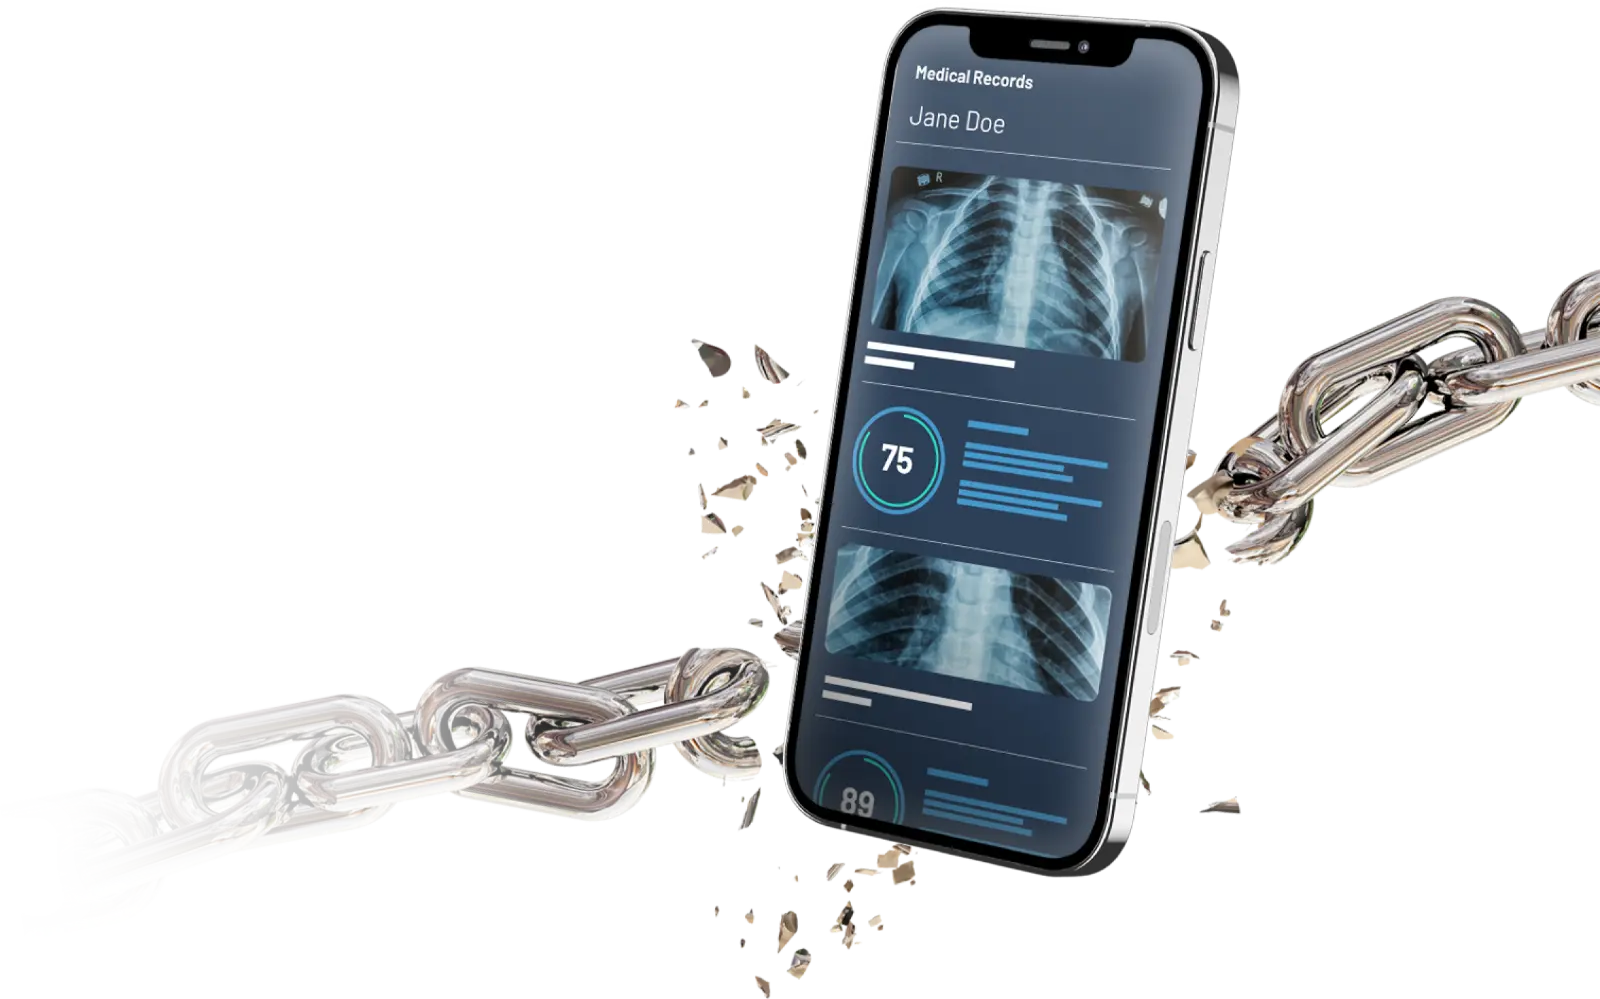 Mobile phone with medical records on screen breaking through thick metallic chains.